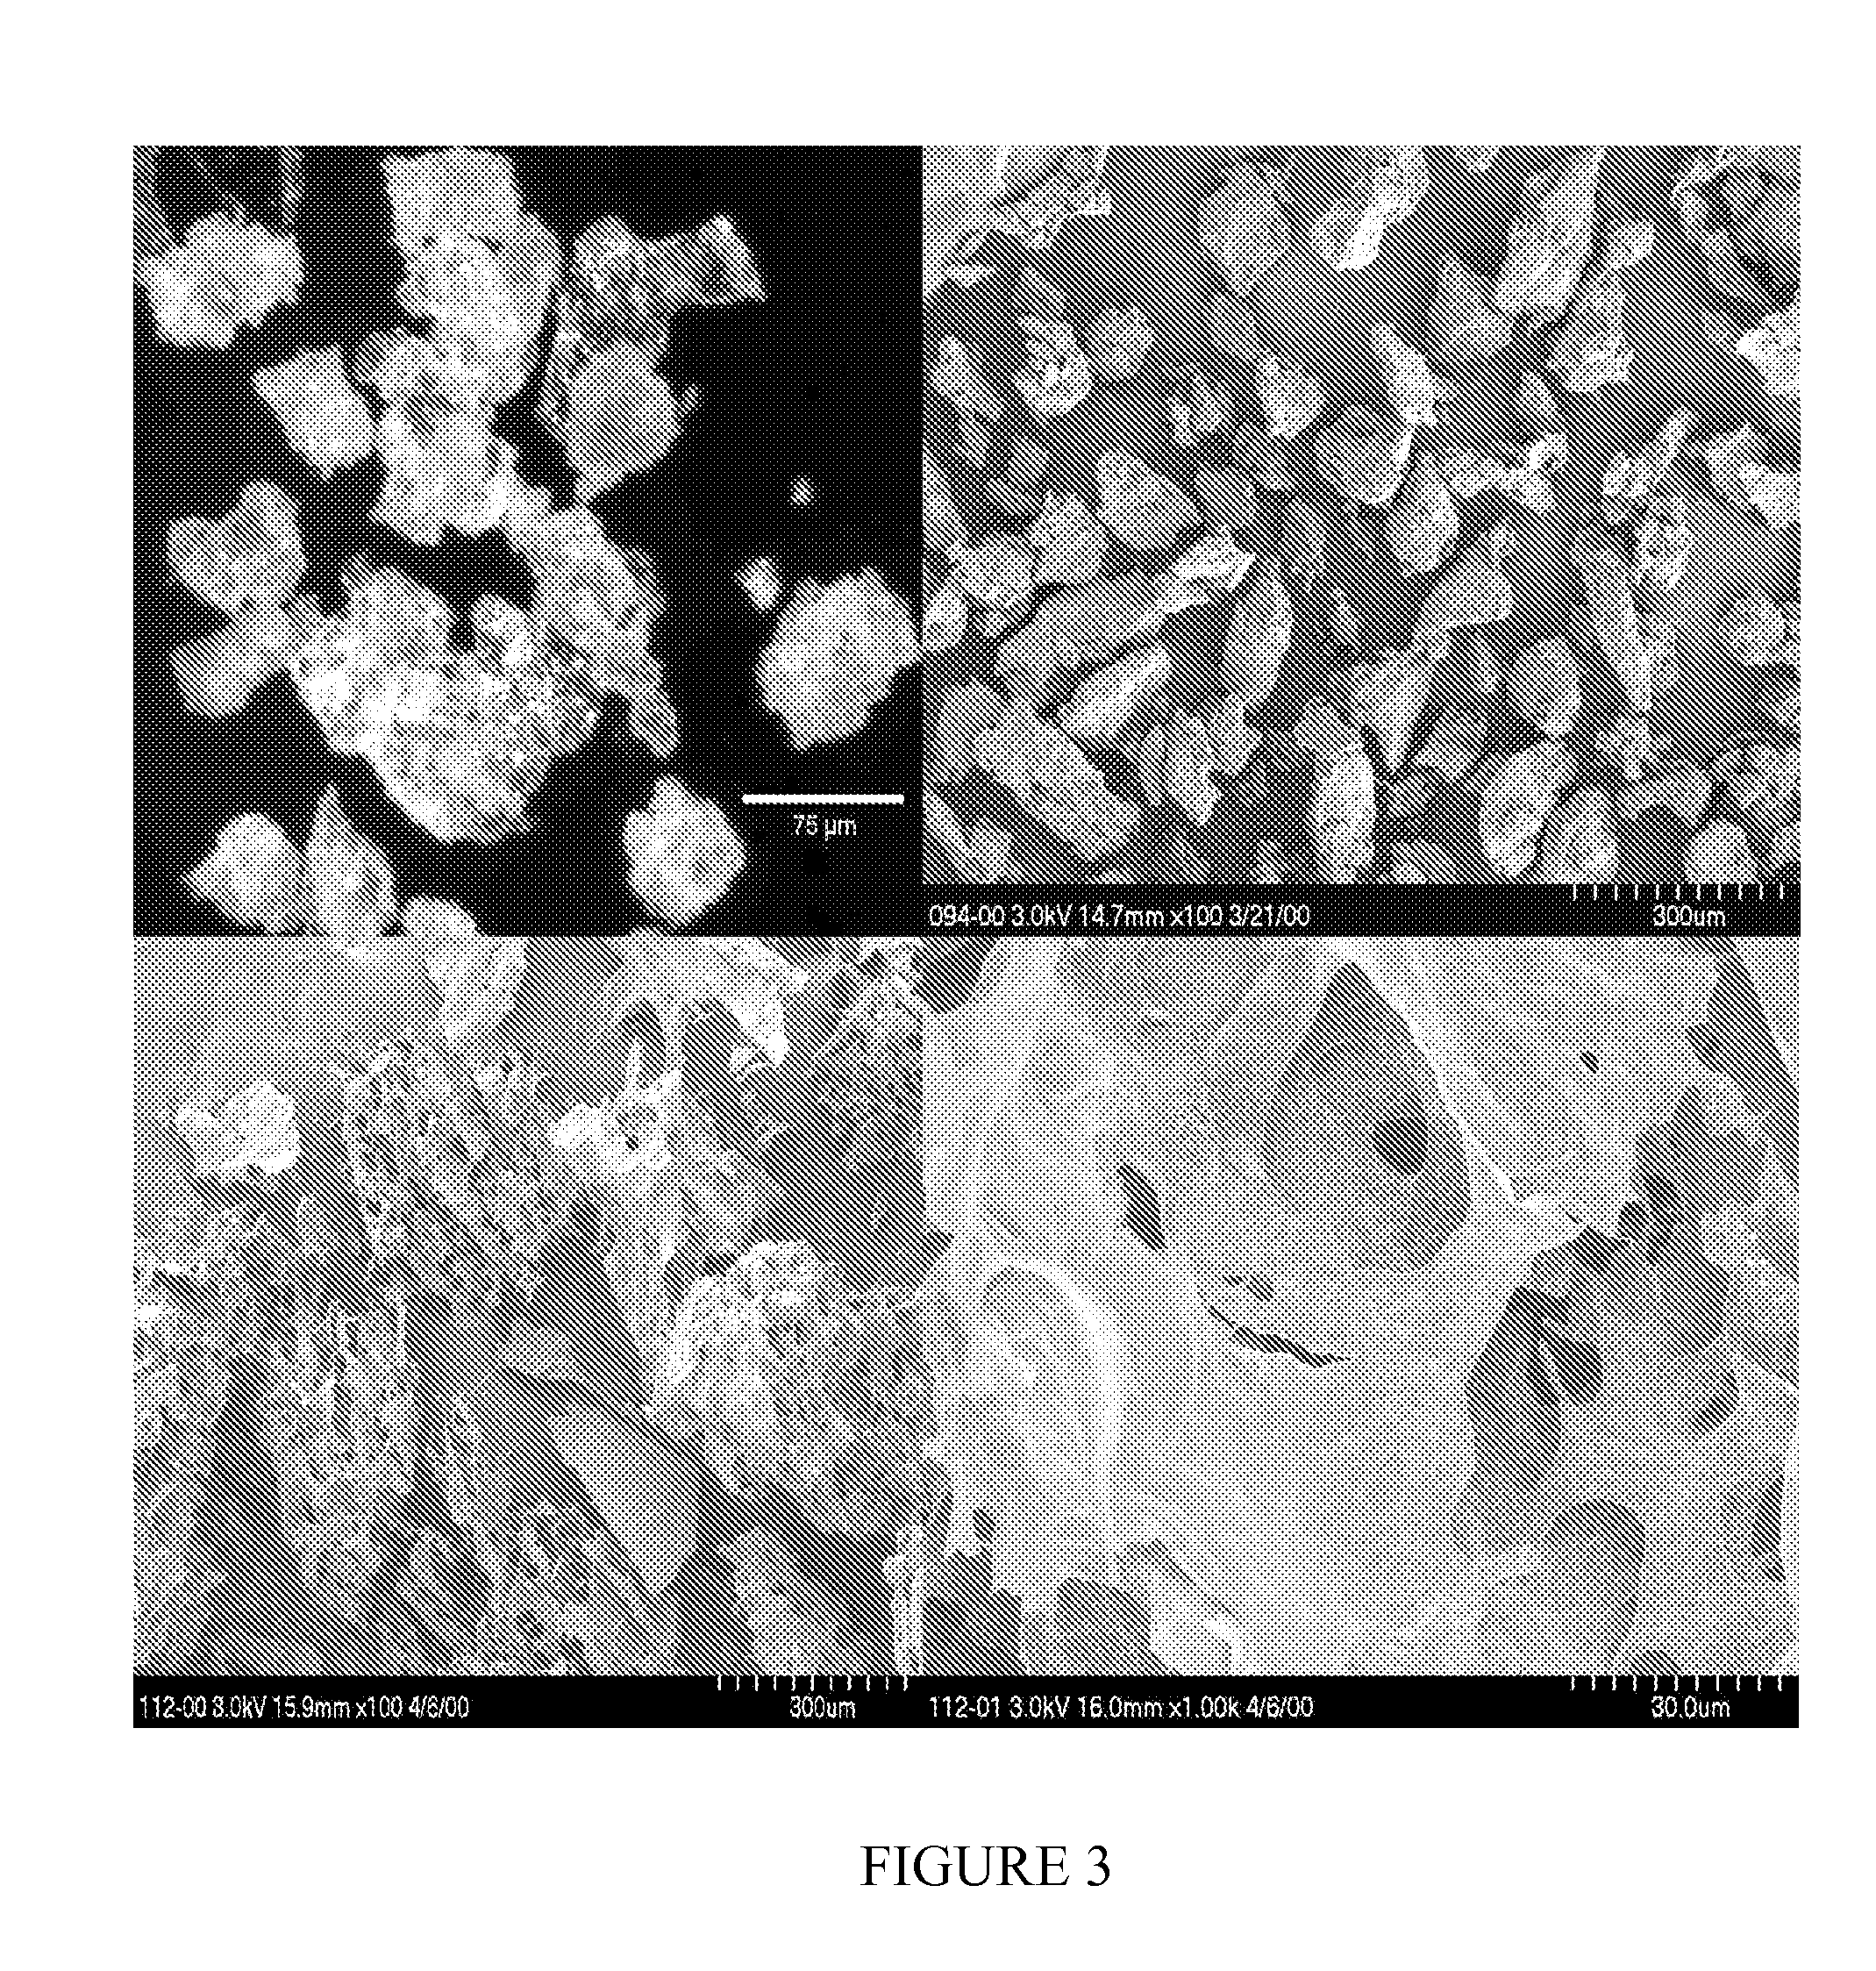 Biocompatible protein-based particles and methods thereof